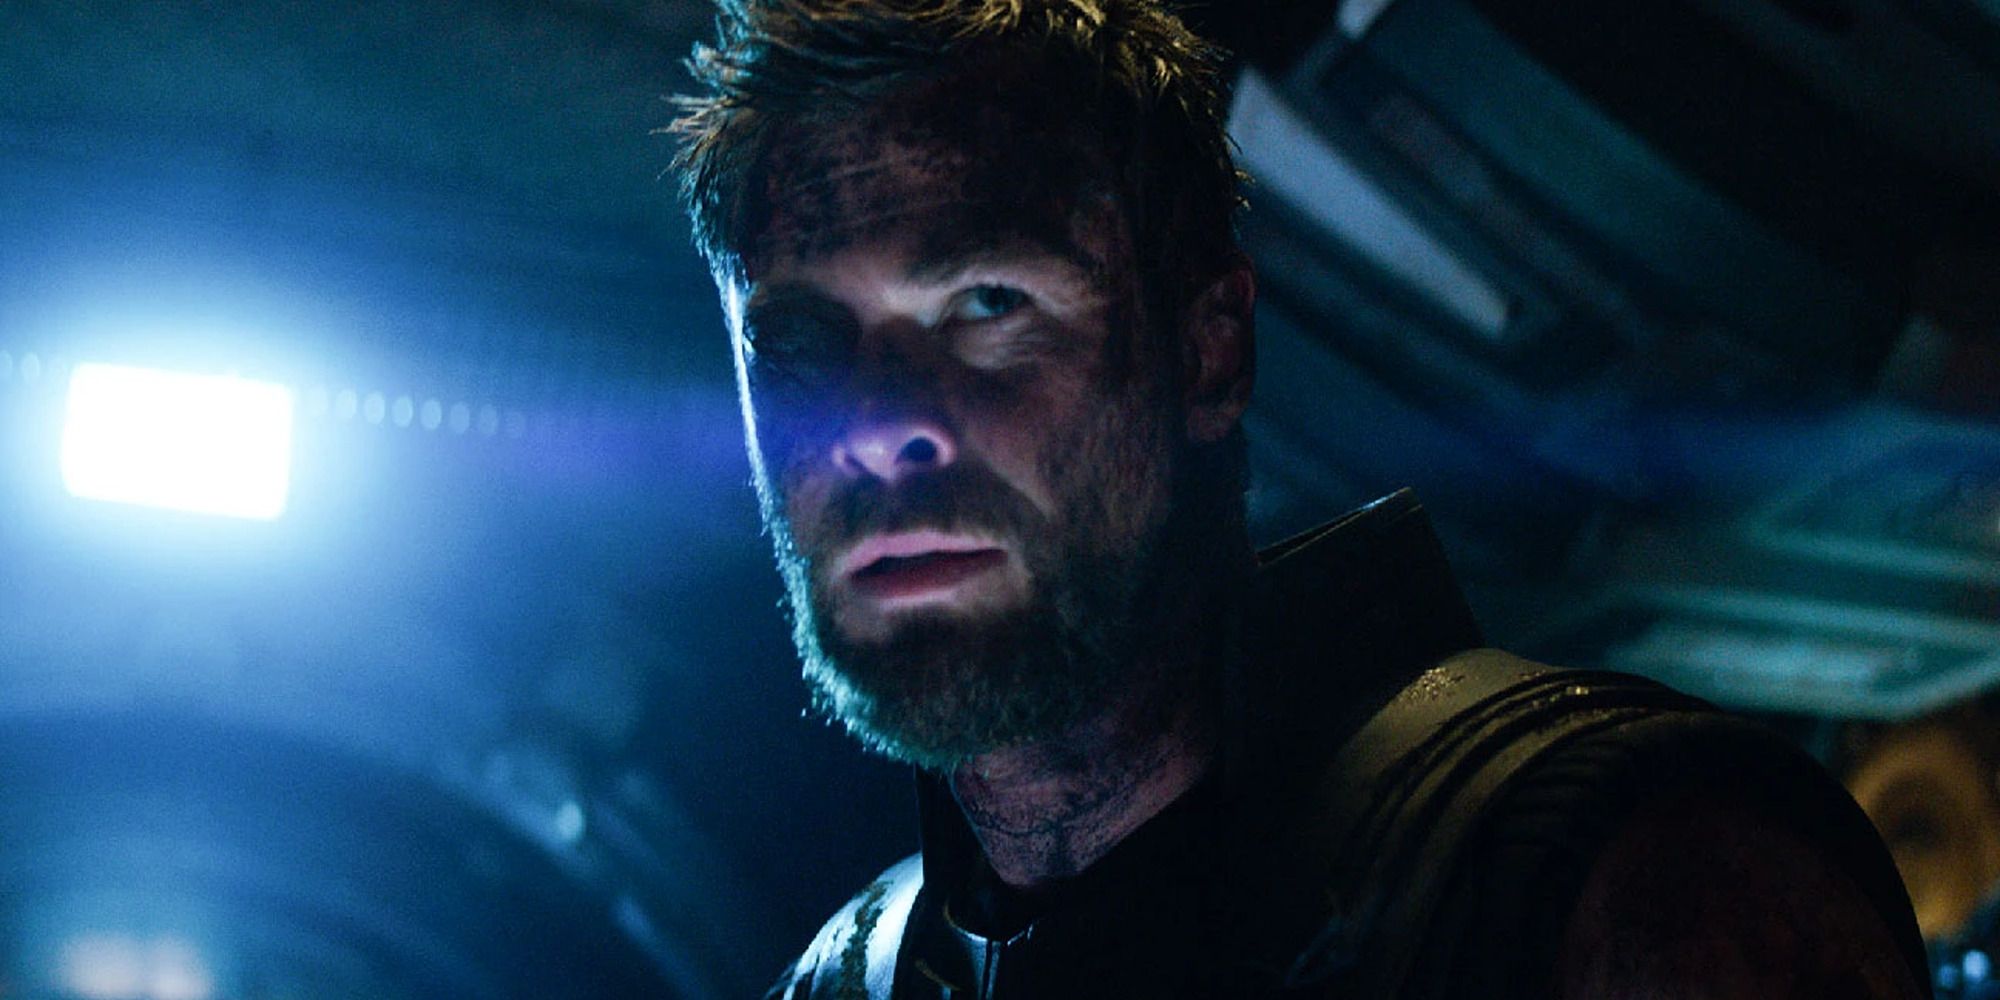 Angry Thor with an eyepatch in 'Avengers: Infinity War'